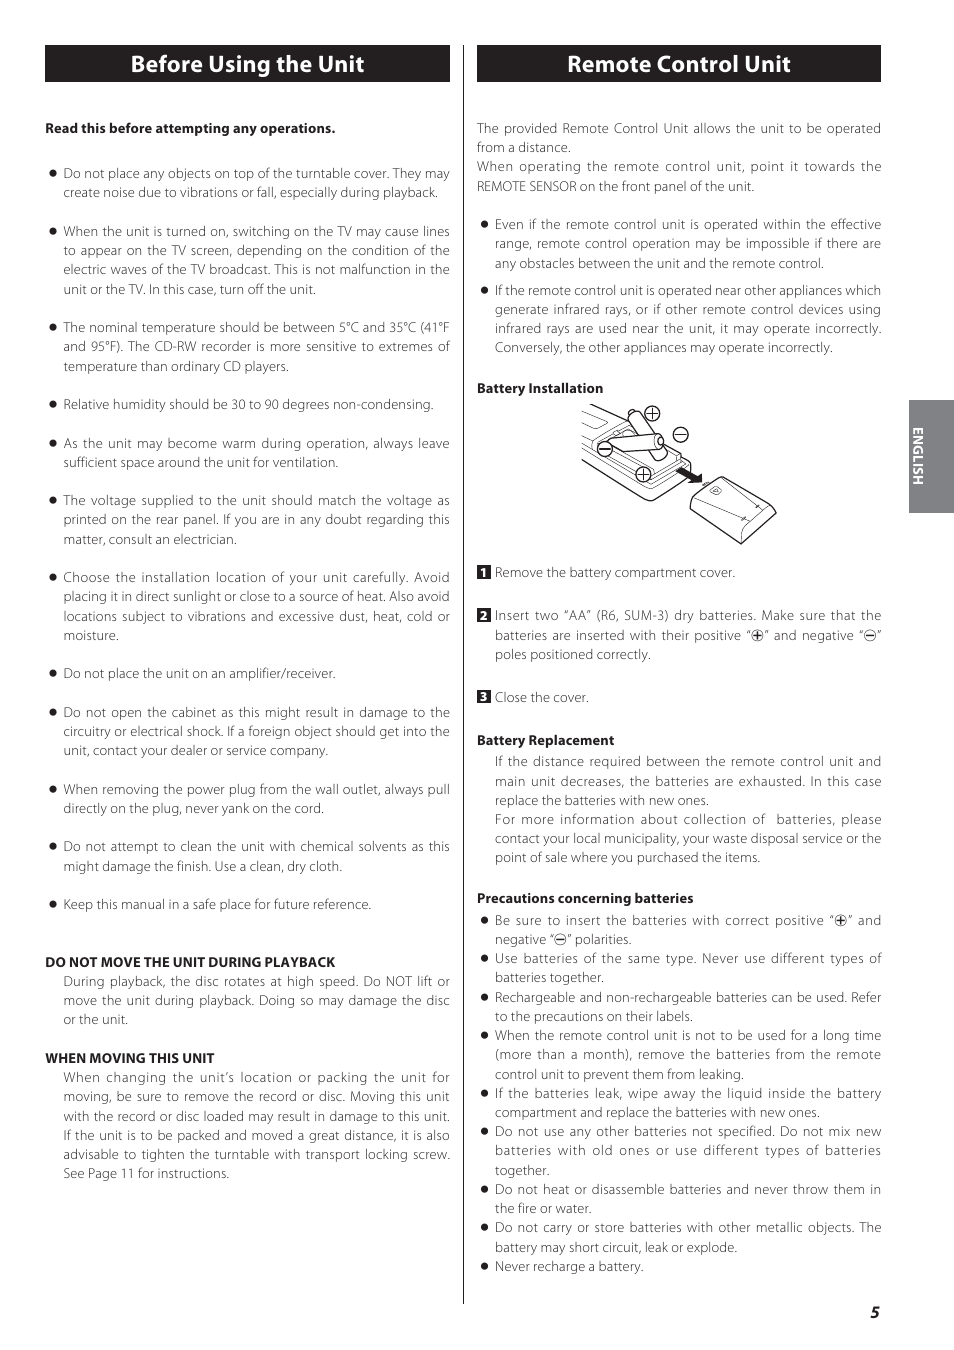 Before using the unit, Remote control unit | Teac GF-550 User Manual | Page 5 / 96